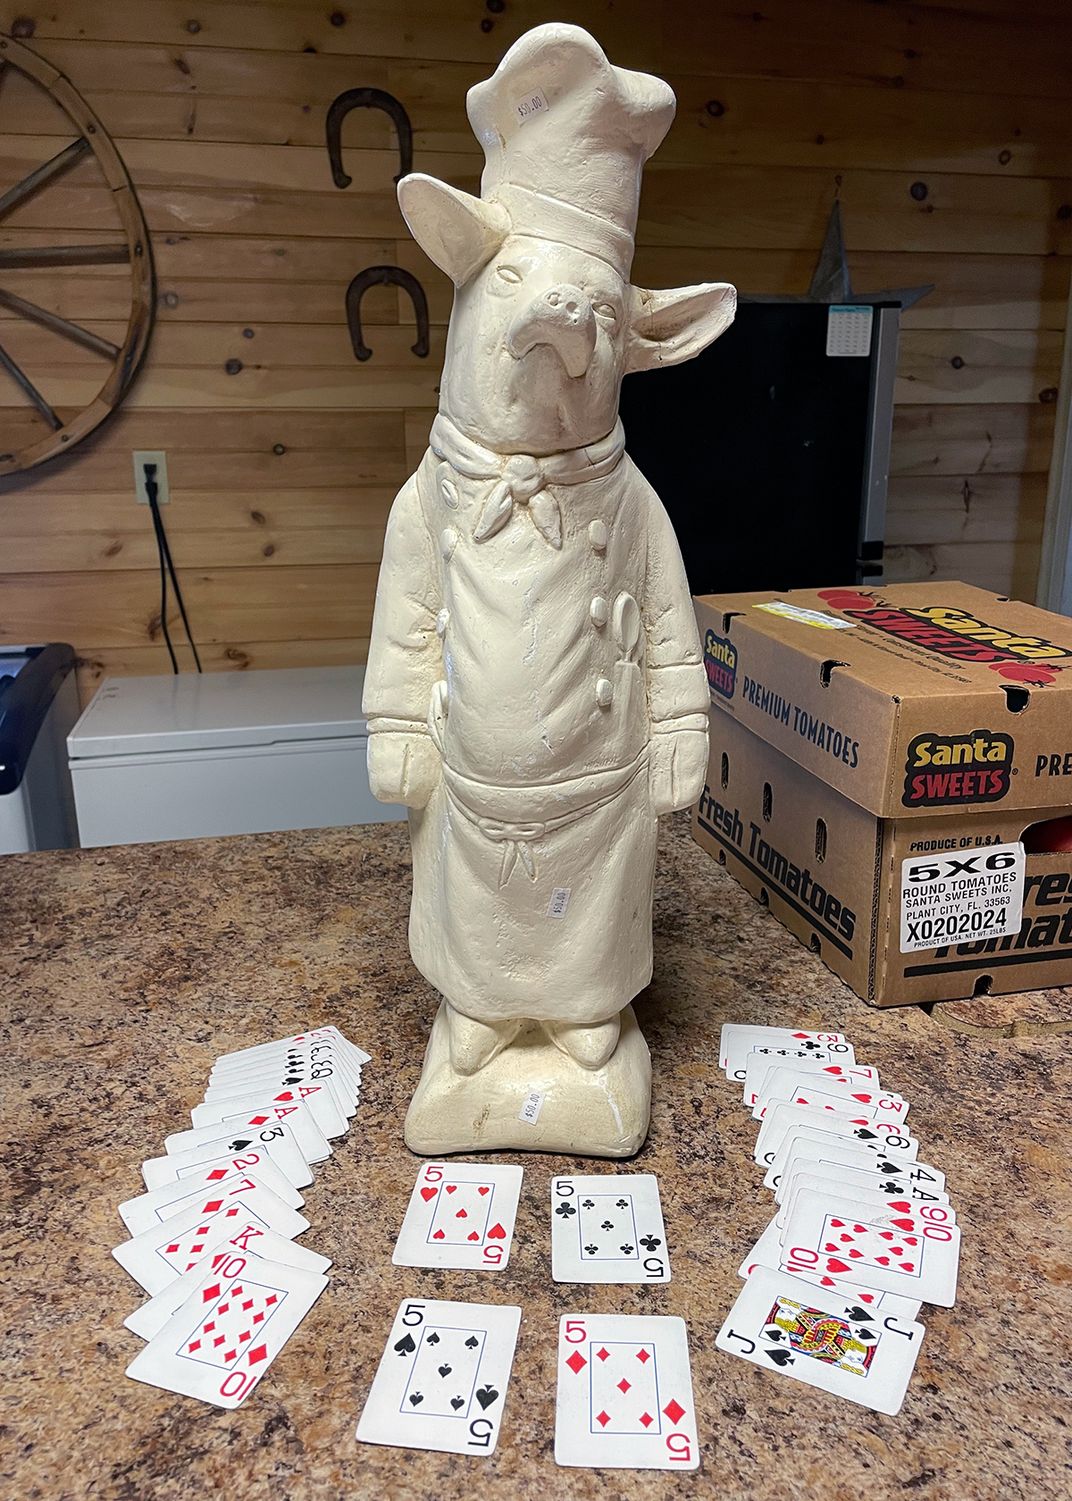 A white figurine of a pig standing on its hind legs, wearing a chef's hat and coat. On the table around it, a deck of playing cards are arranged, with fives of all suits in front.